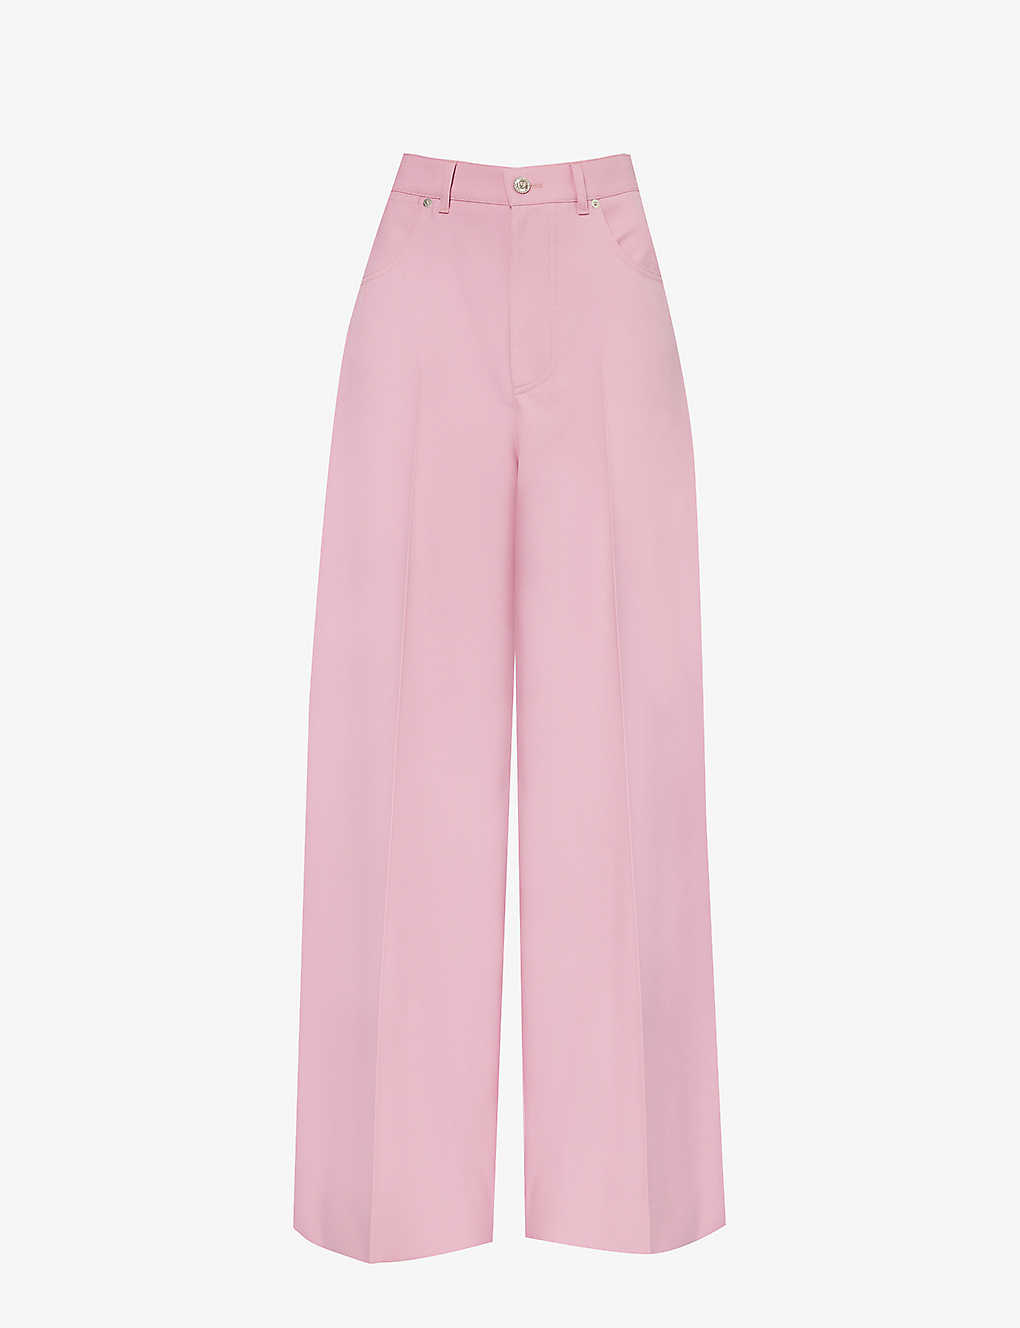 Shop Gucci Women's Dream Candy Pressed-crease High-rise Wide-leg Wool Trousers